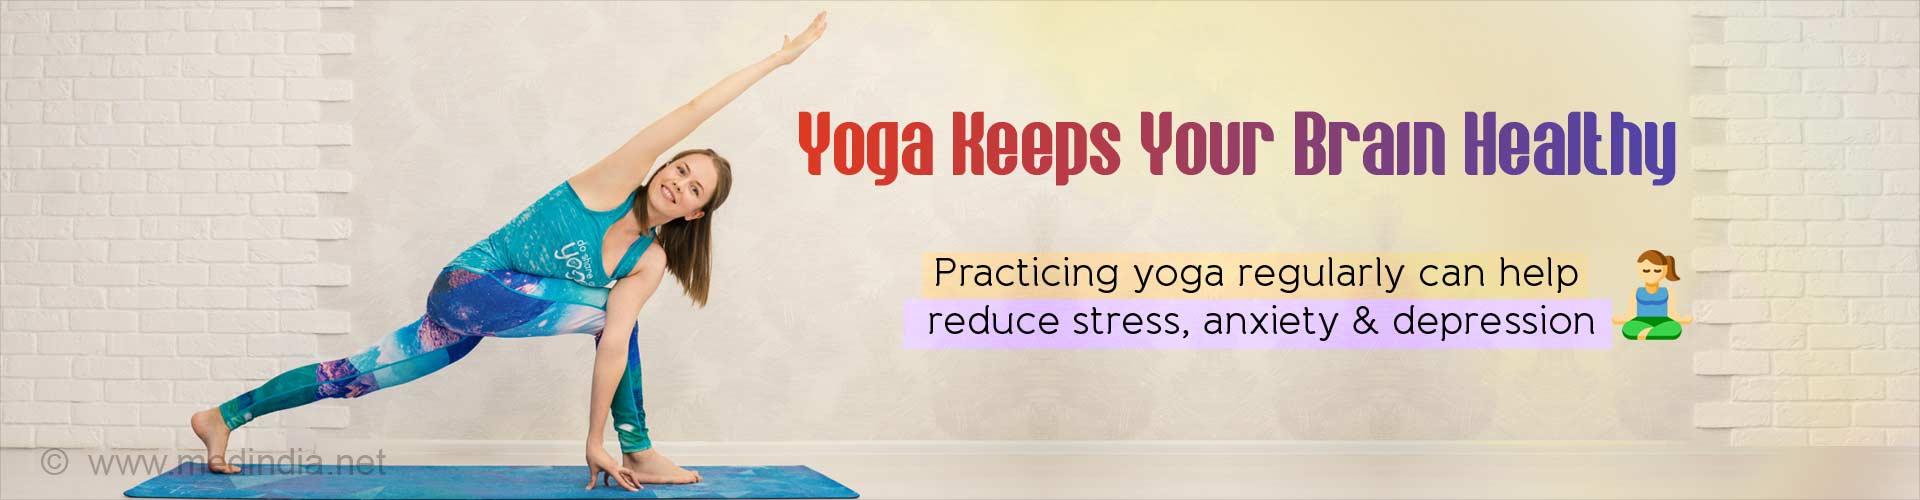 Yoga keeps your brain healthy. Practicing yoga regularly can help reduce stress, anxiety and depression.